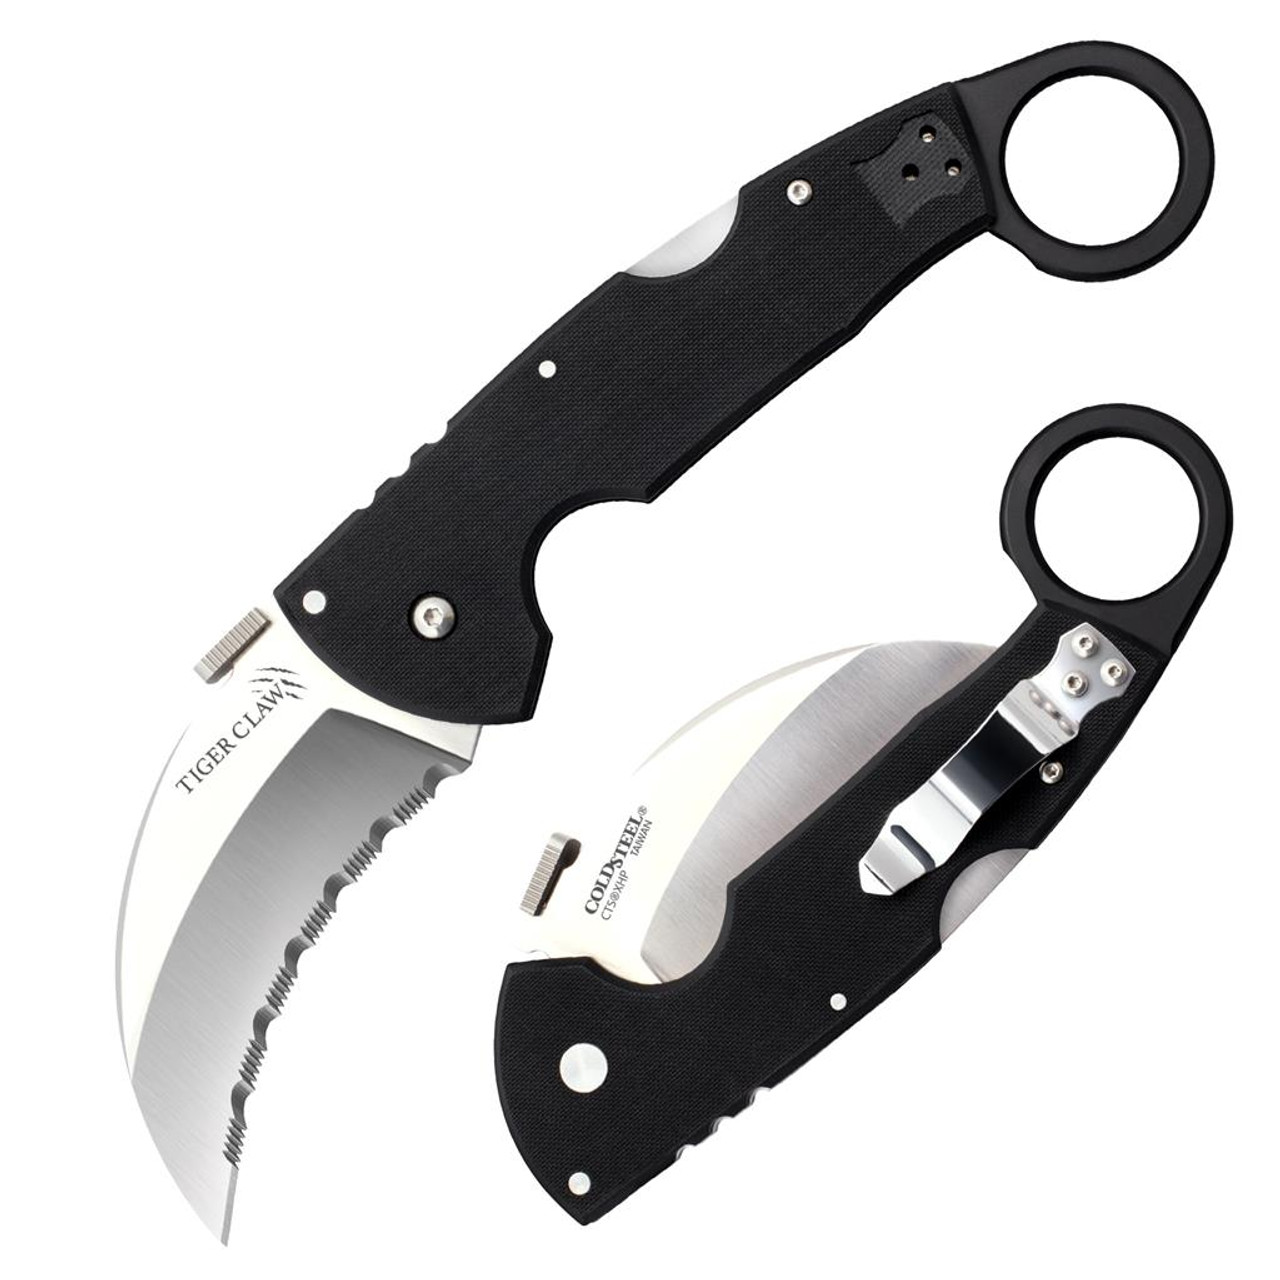 Cold Steel Tiger Claw 3-1/2 Inch S35vn Stainless Steel Blade